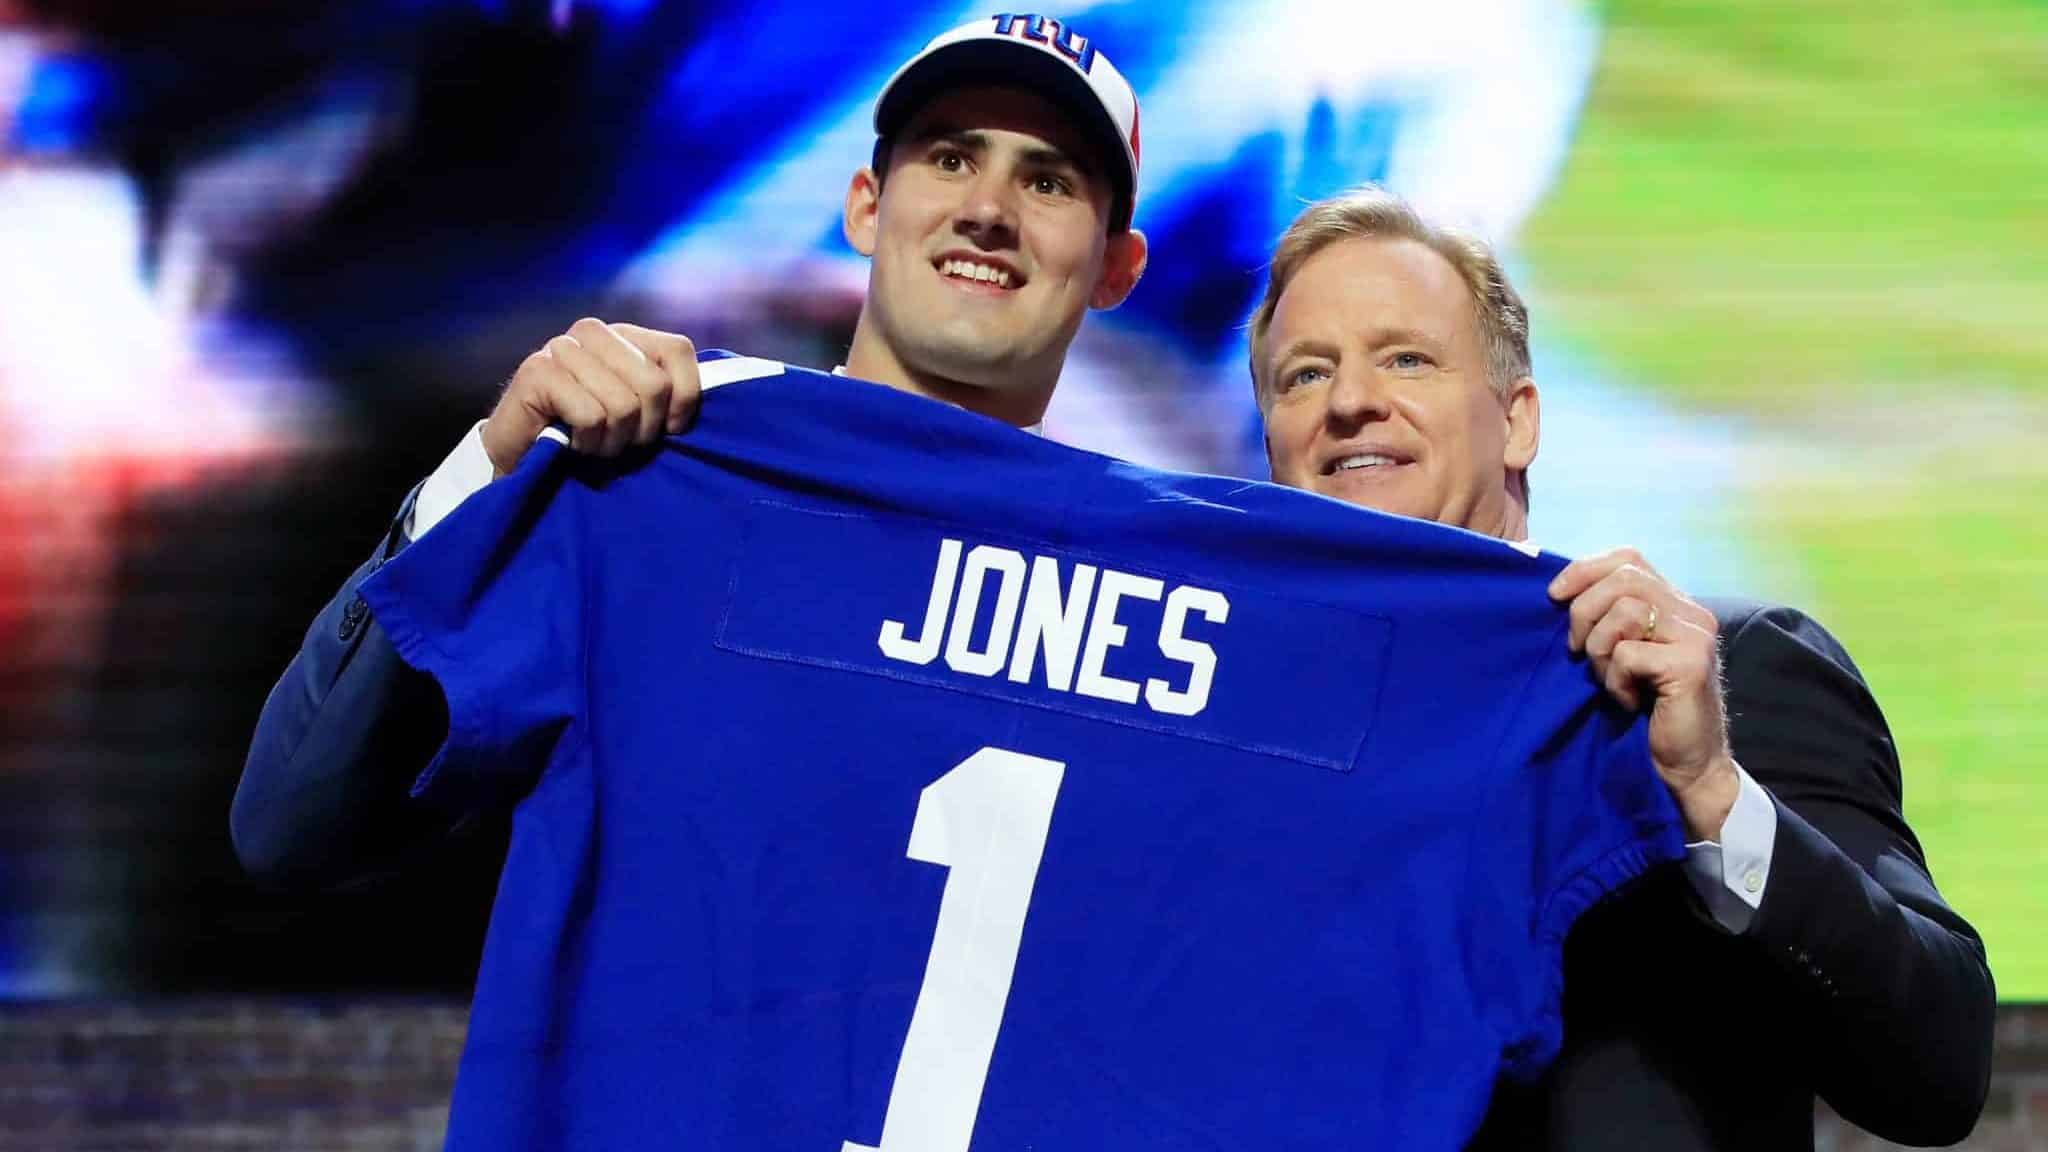 NASHVILLE, TENNESSEE - APRIL 25: Daniel Jones of Duke poses with NFL Commissioner Roger Goodell after being chosen #6 overall by the New York Giants during the first round of the 2019 NFL Draft on April 25, 2019 in Nashville, Tennessee.